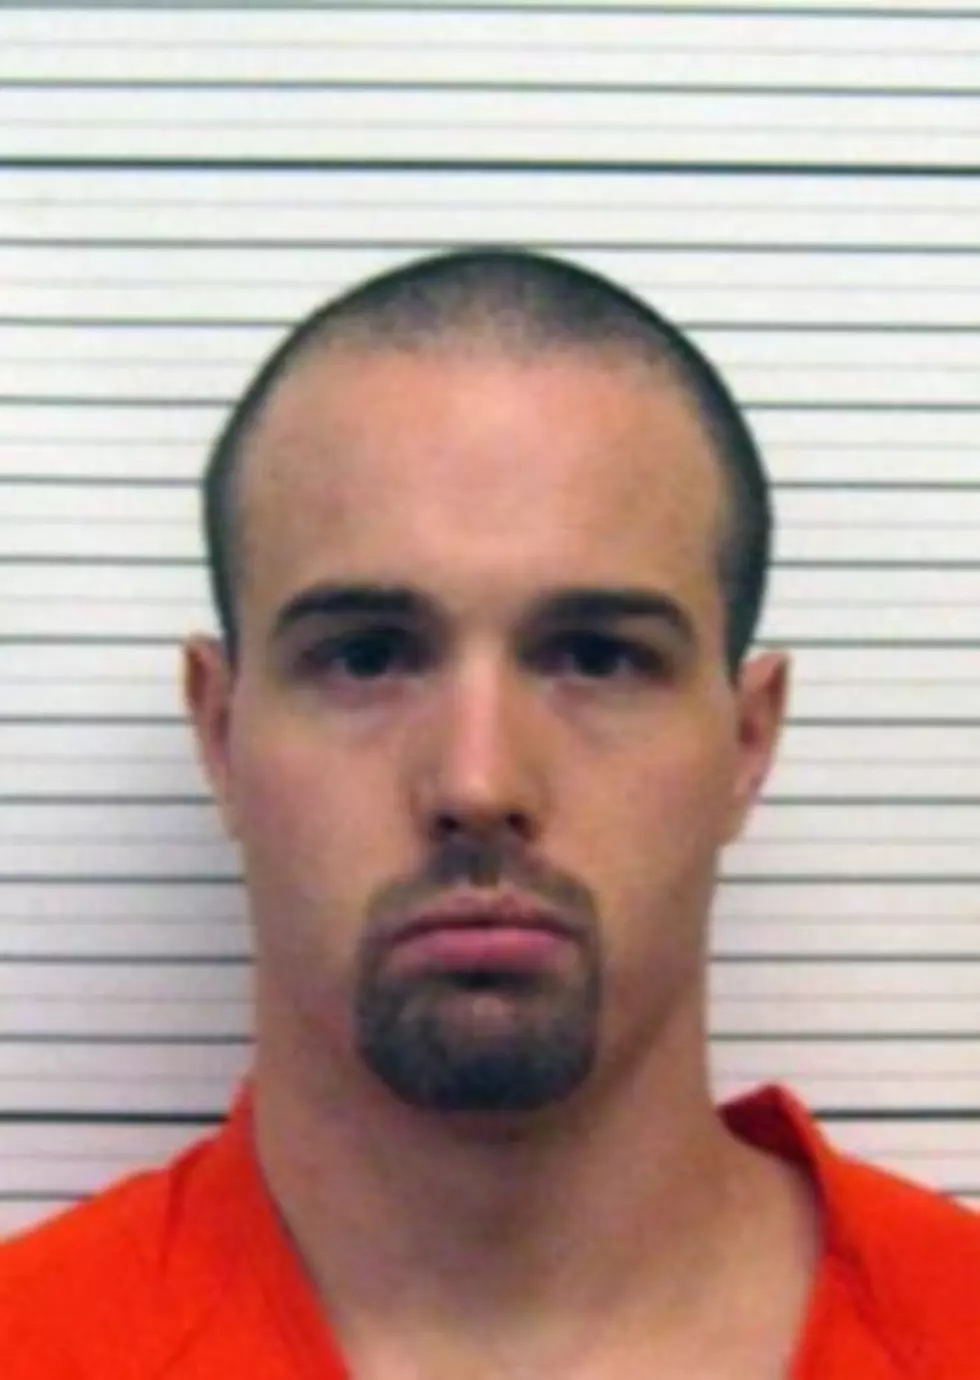 Inmate Escapes from Wyoming Honor Conservation Camp